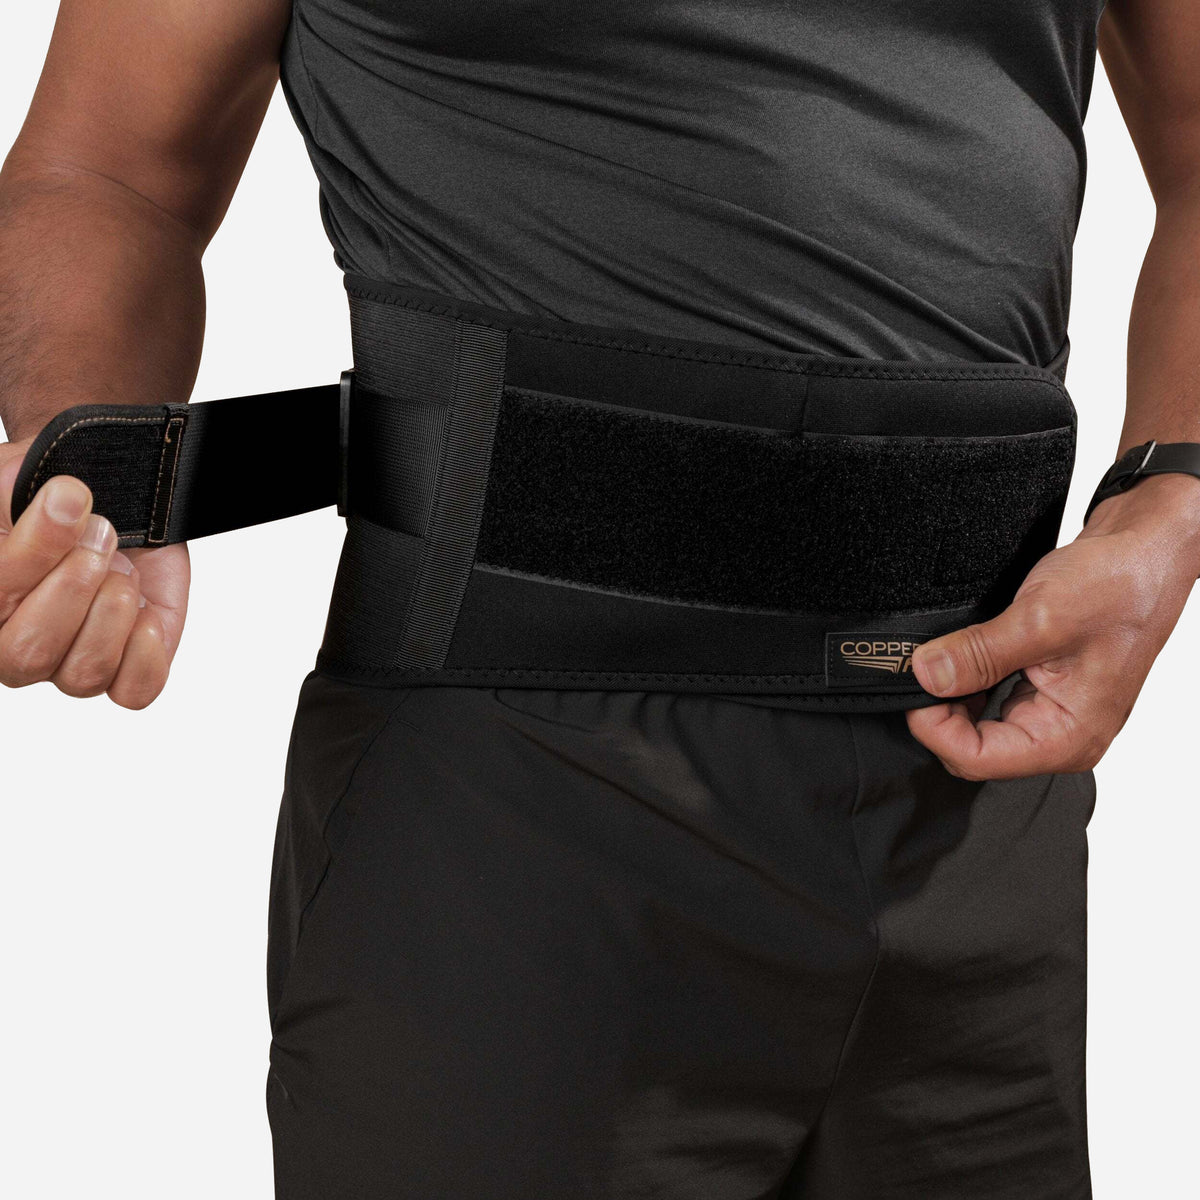 Copper Fit Men's Rapid Relief Back Support Brace With Hot/cold